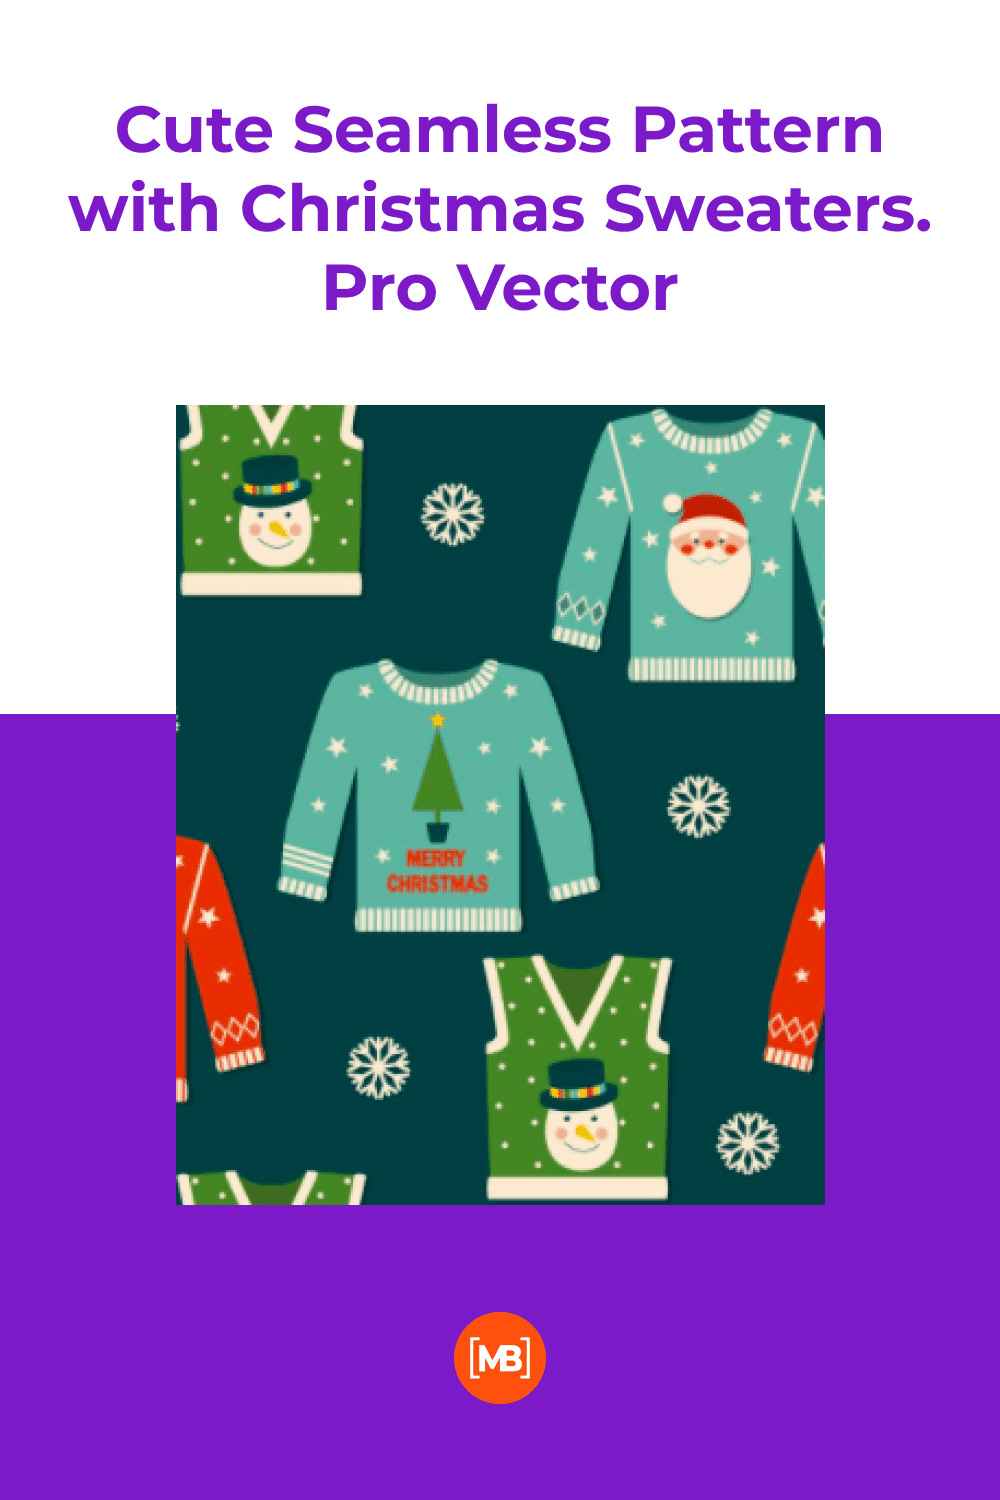 Cute Seamless Pattern with Christmas Sweaters.